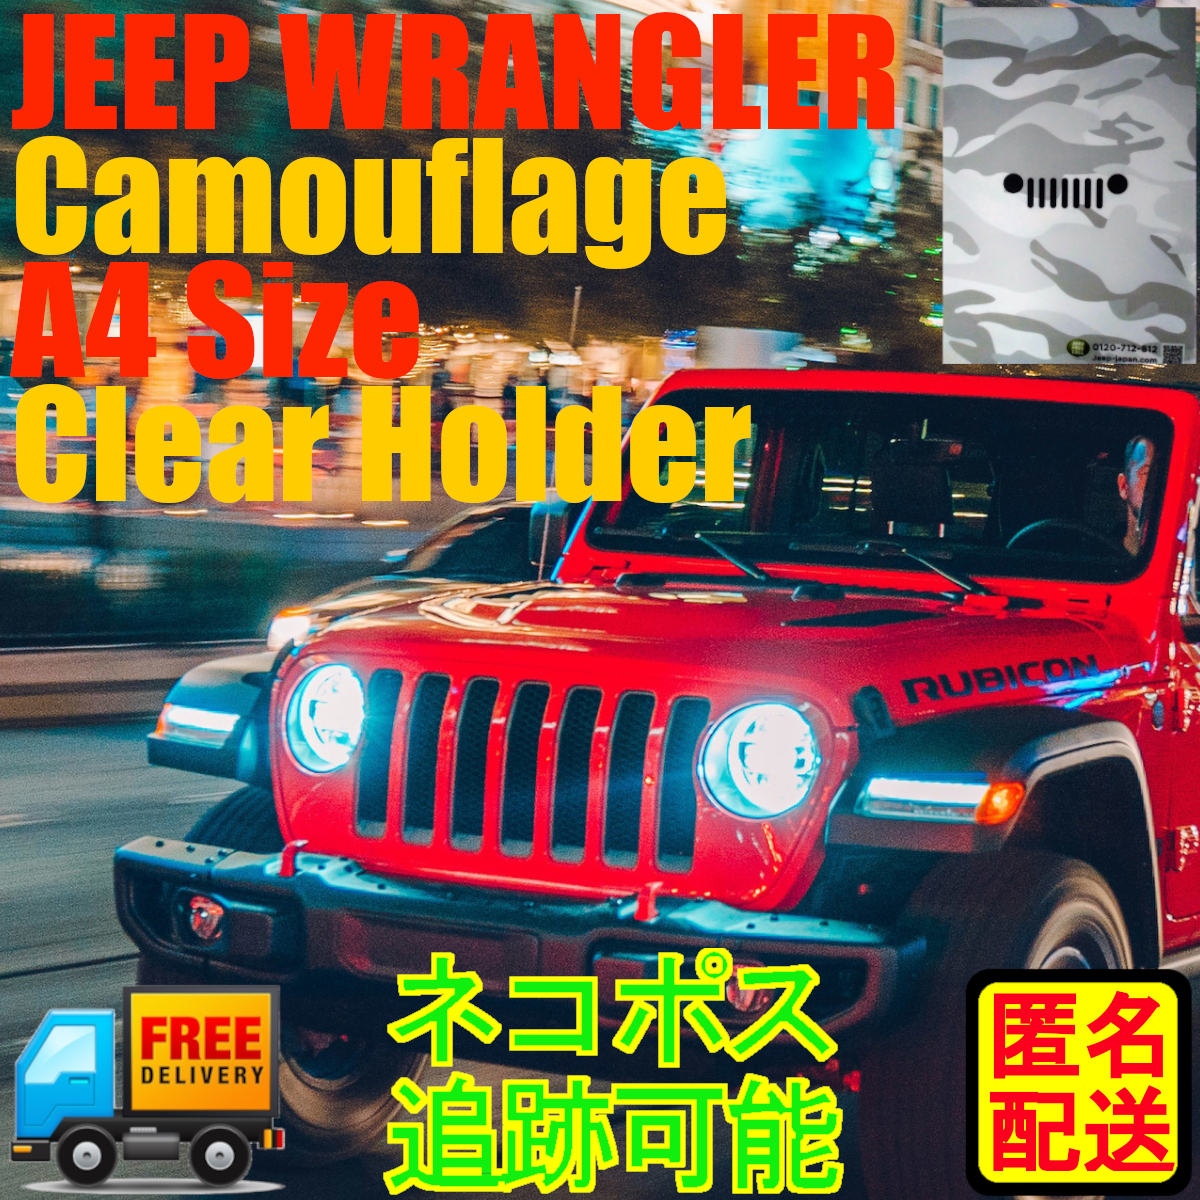 Jeep Wrangler Camouflage A4 Size Clear Polder